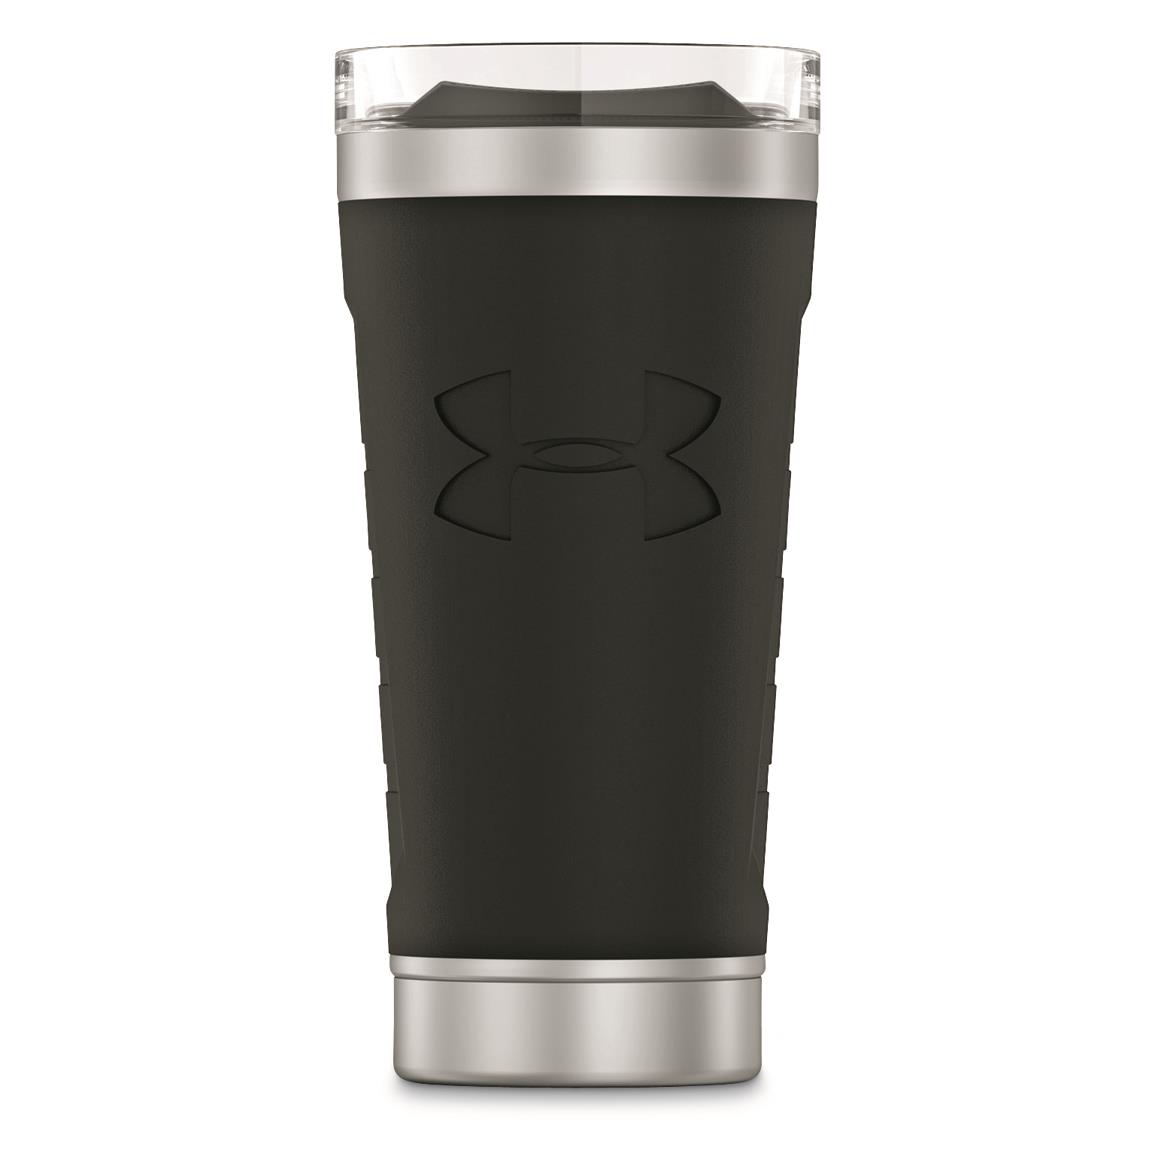 under armour thermos replacement parts